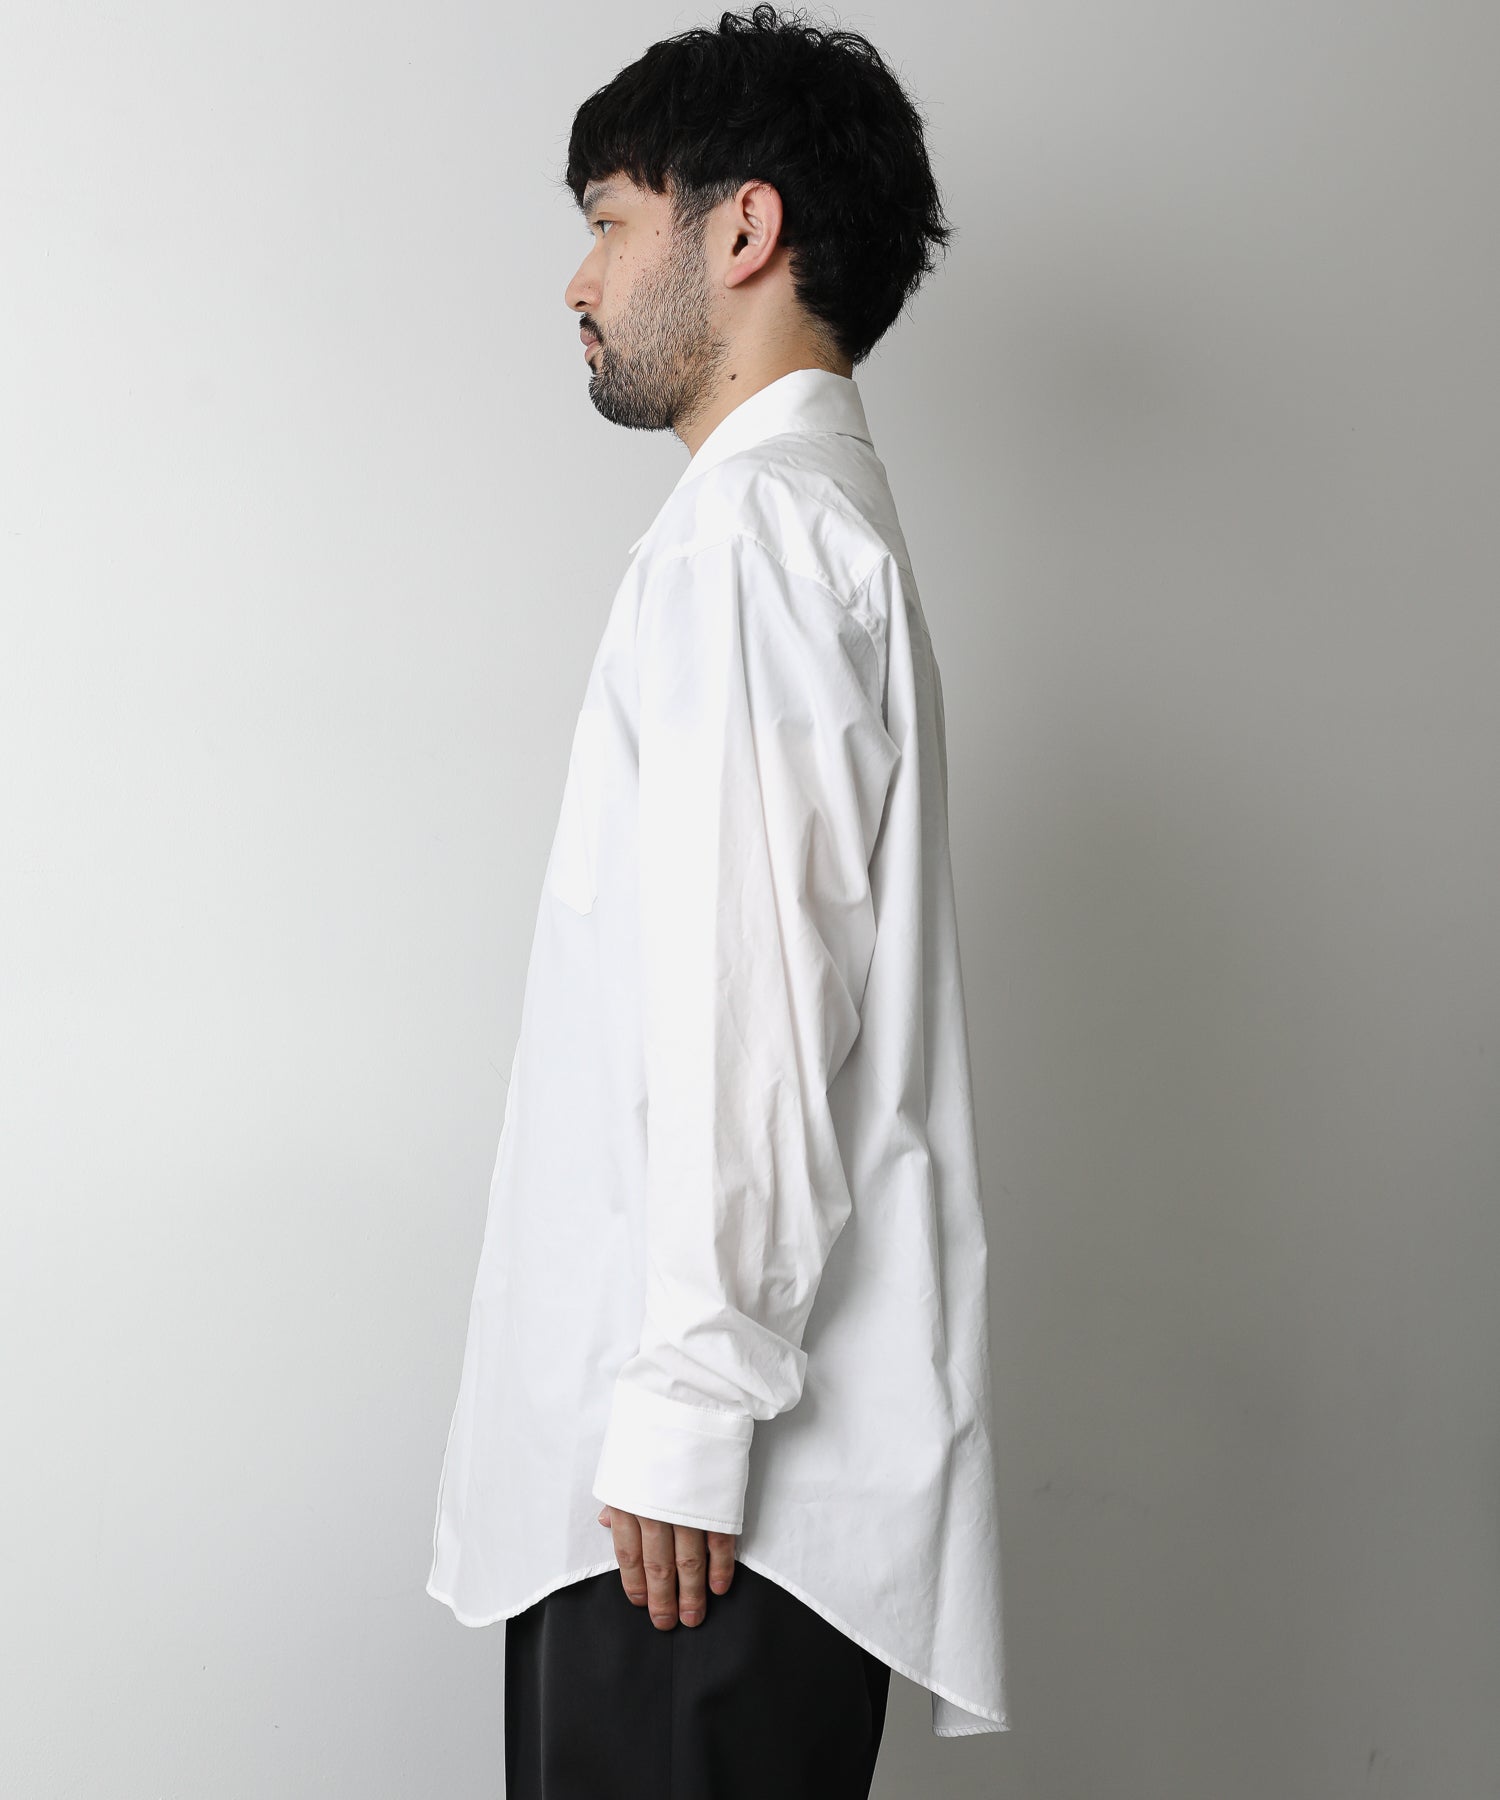 stein】OVERSIZED STANDARD SHIRT | 公式通販サイト session(セッション)